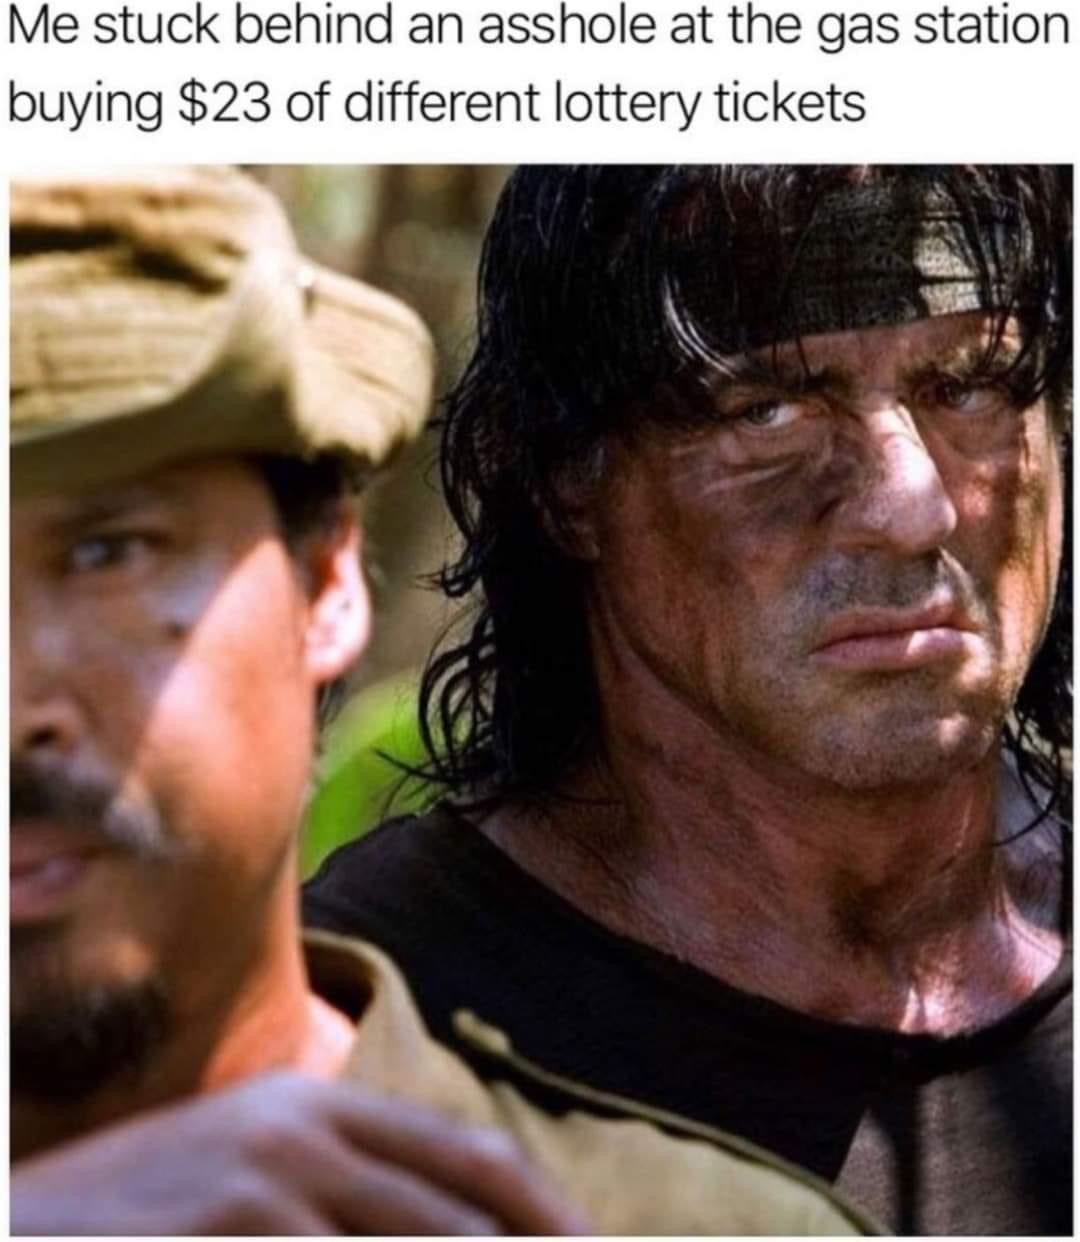 rambo 5 - Me stuck behind an asshole at the gas station buying $23 of different lottery tickets